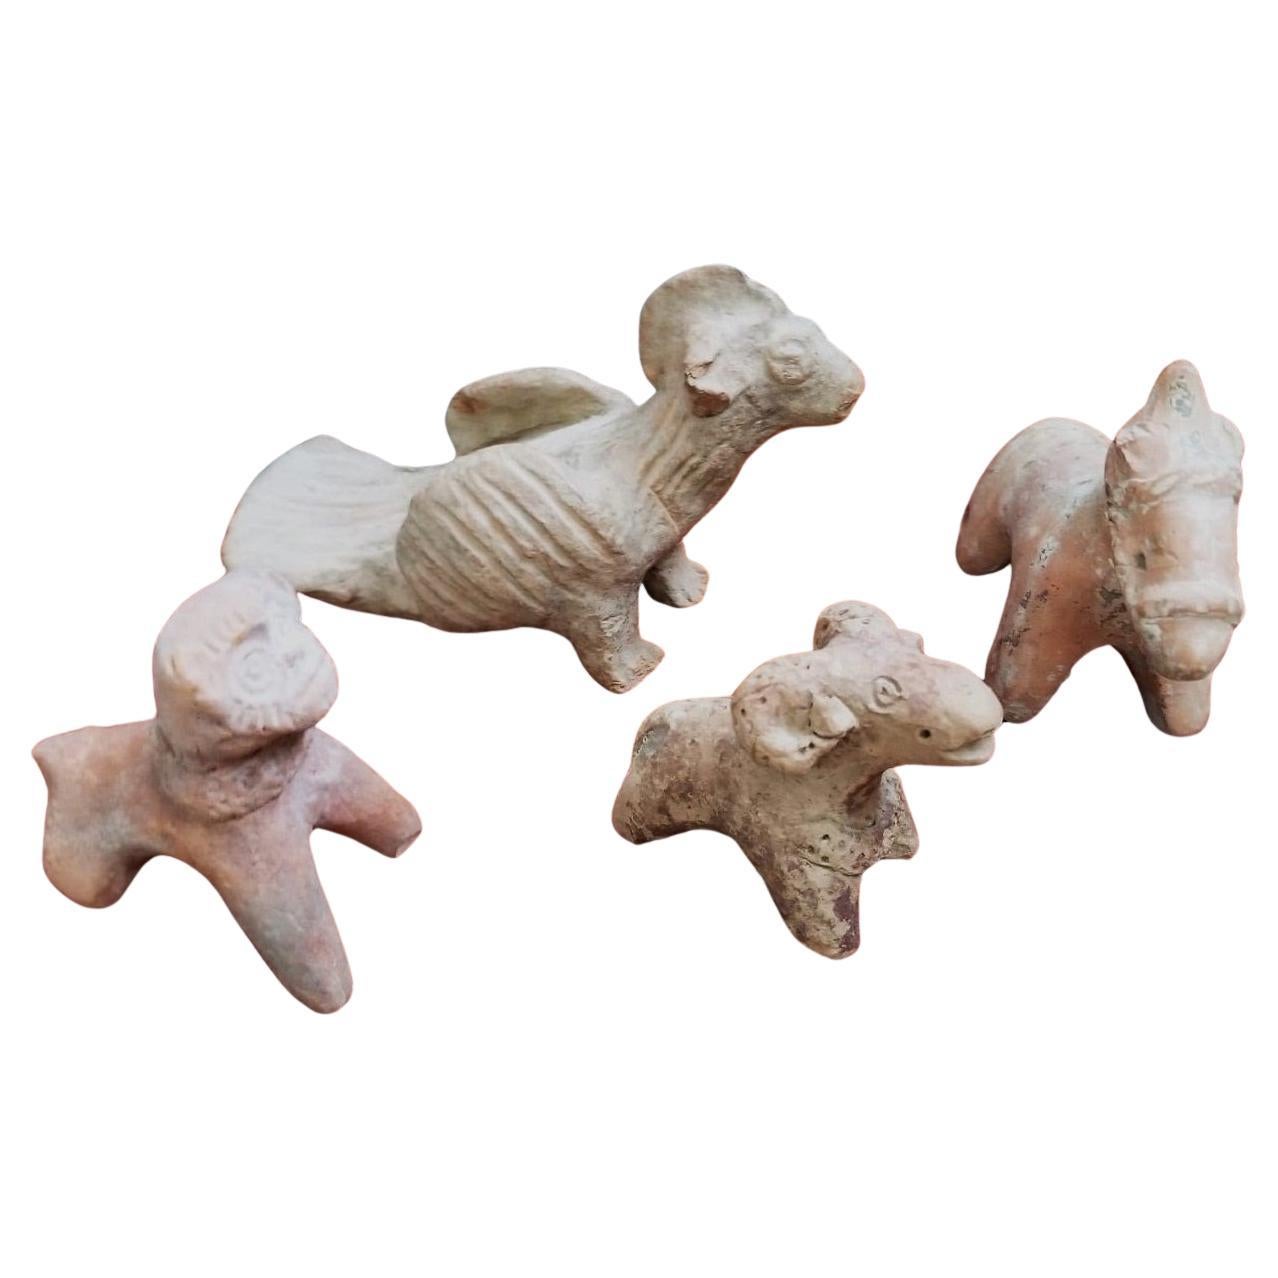 1st Century BC Group of 4 Terracotta Animals from Indus Valley